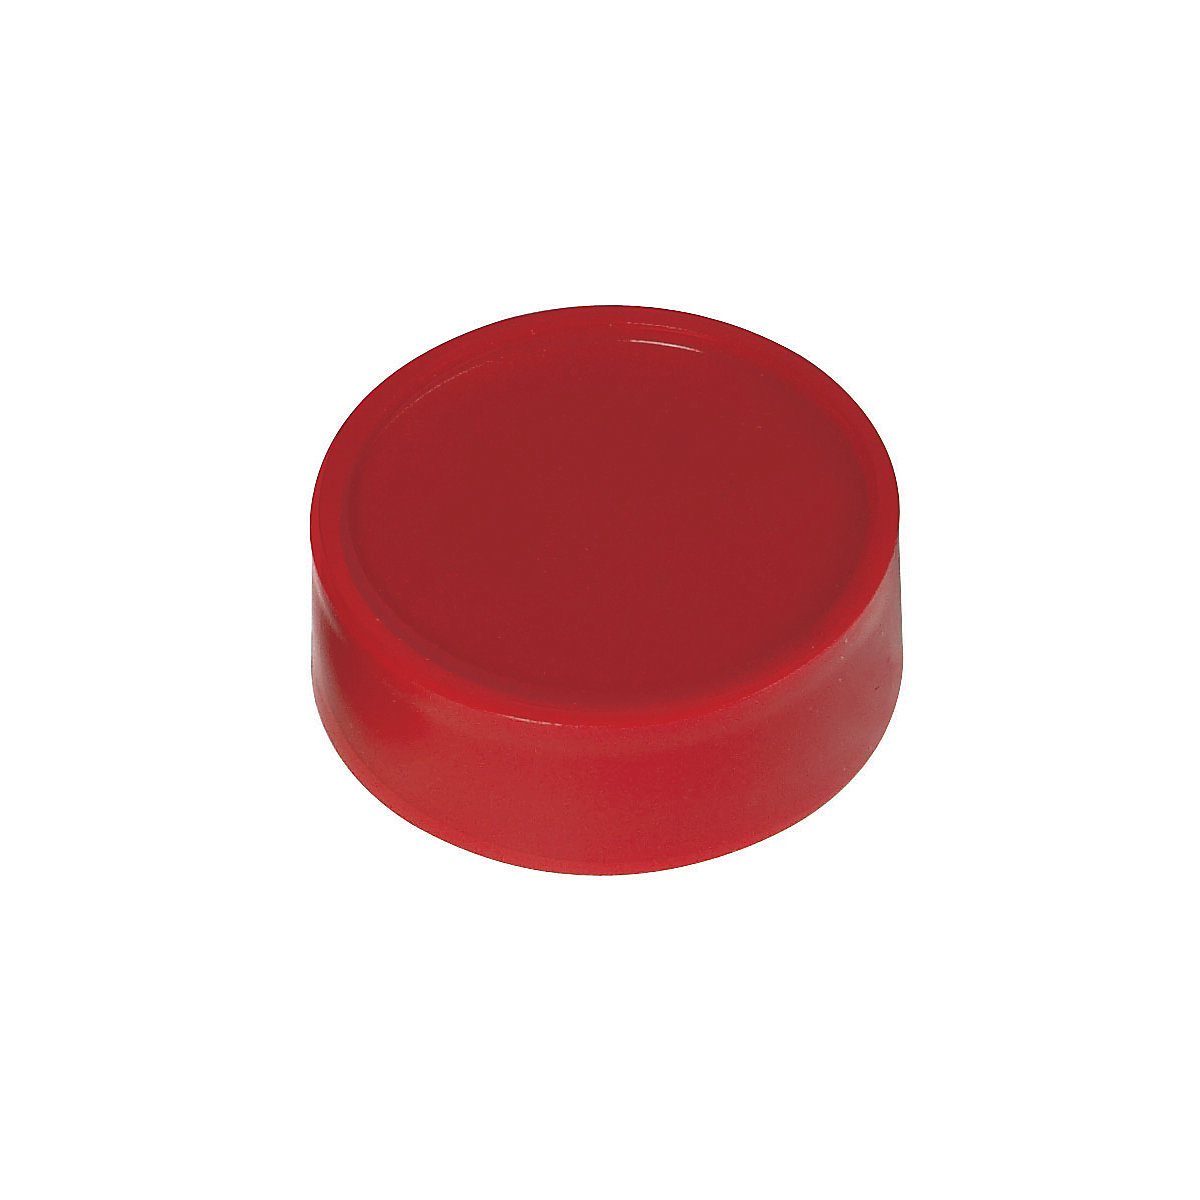 Round magnets – MAUL, Ø 34 mm, pack of 50, red-6